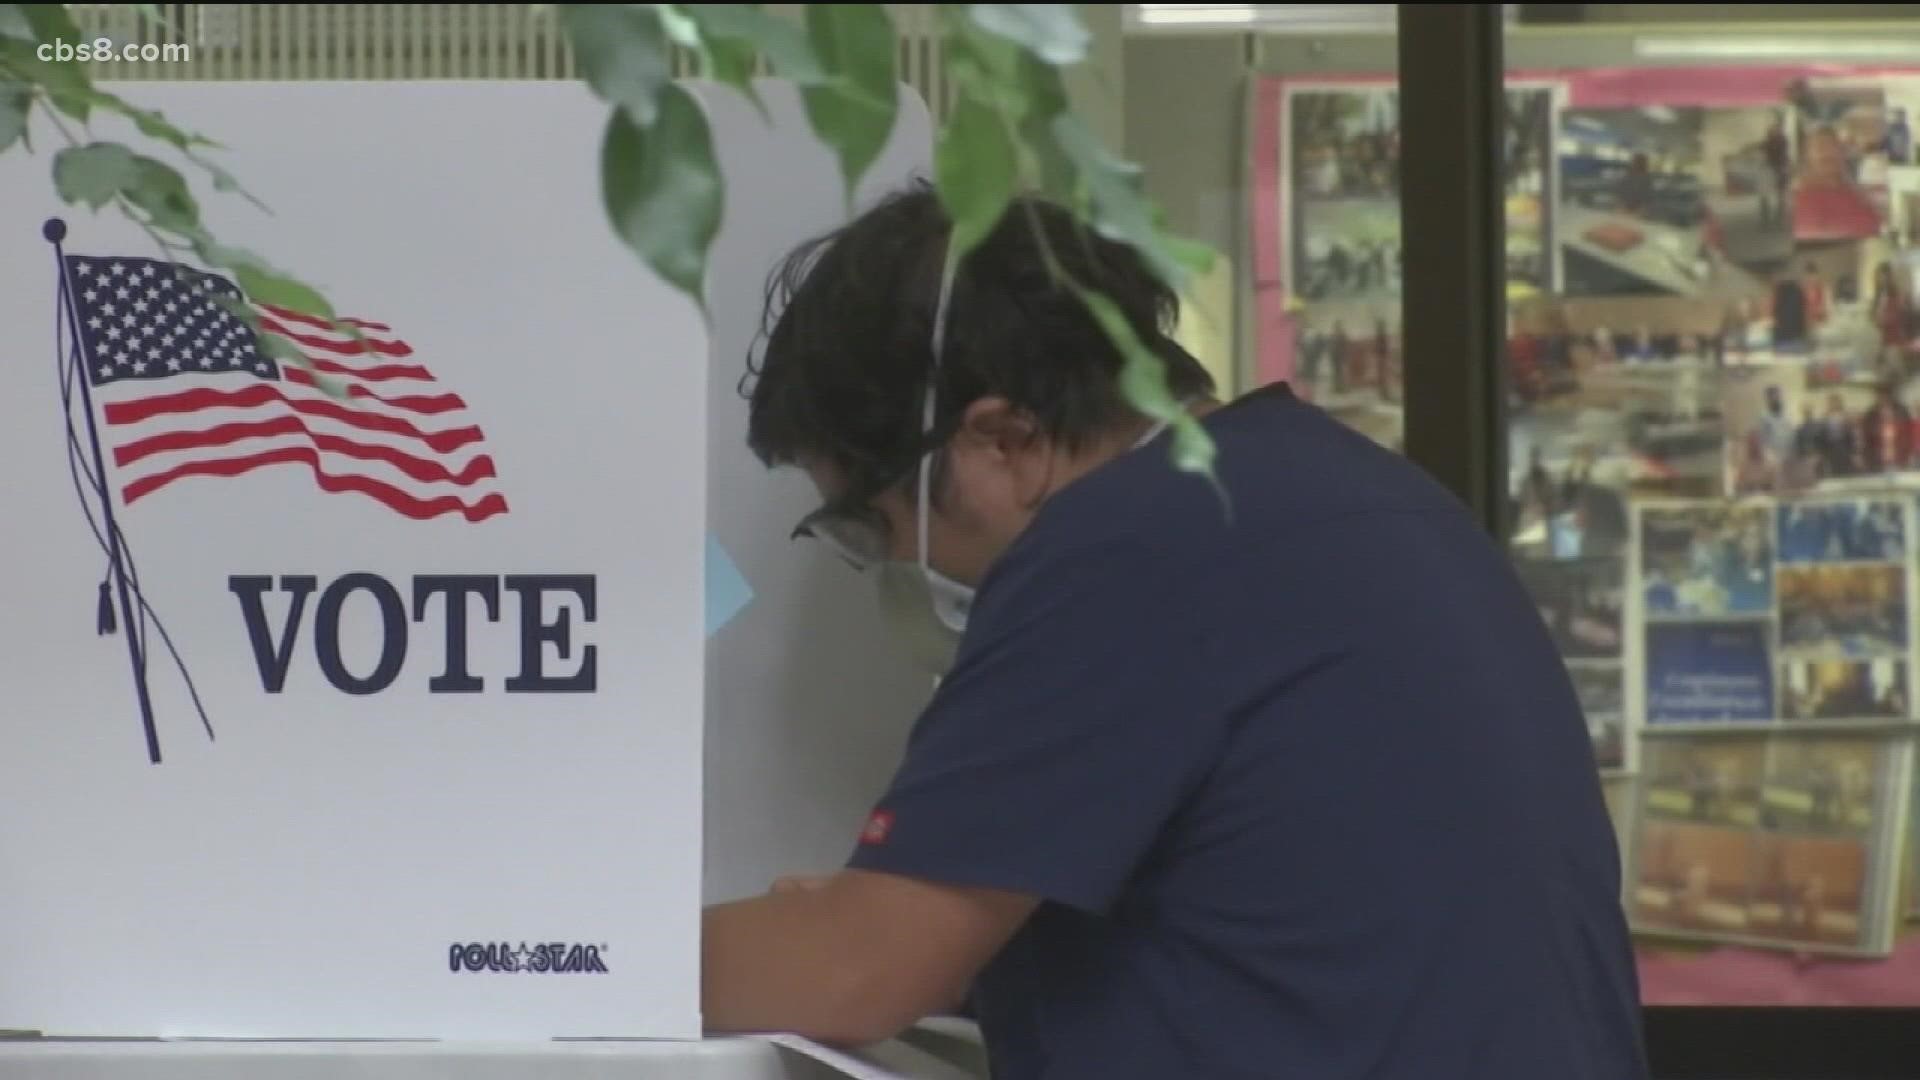 As some candidates cast doubt on the legitimacy of the upcoming election, state officials are working closely with local offices and the FBI to ensure it is safe.